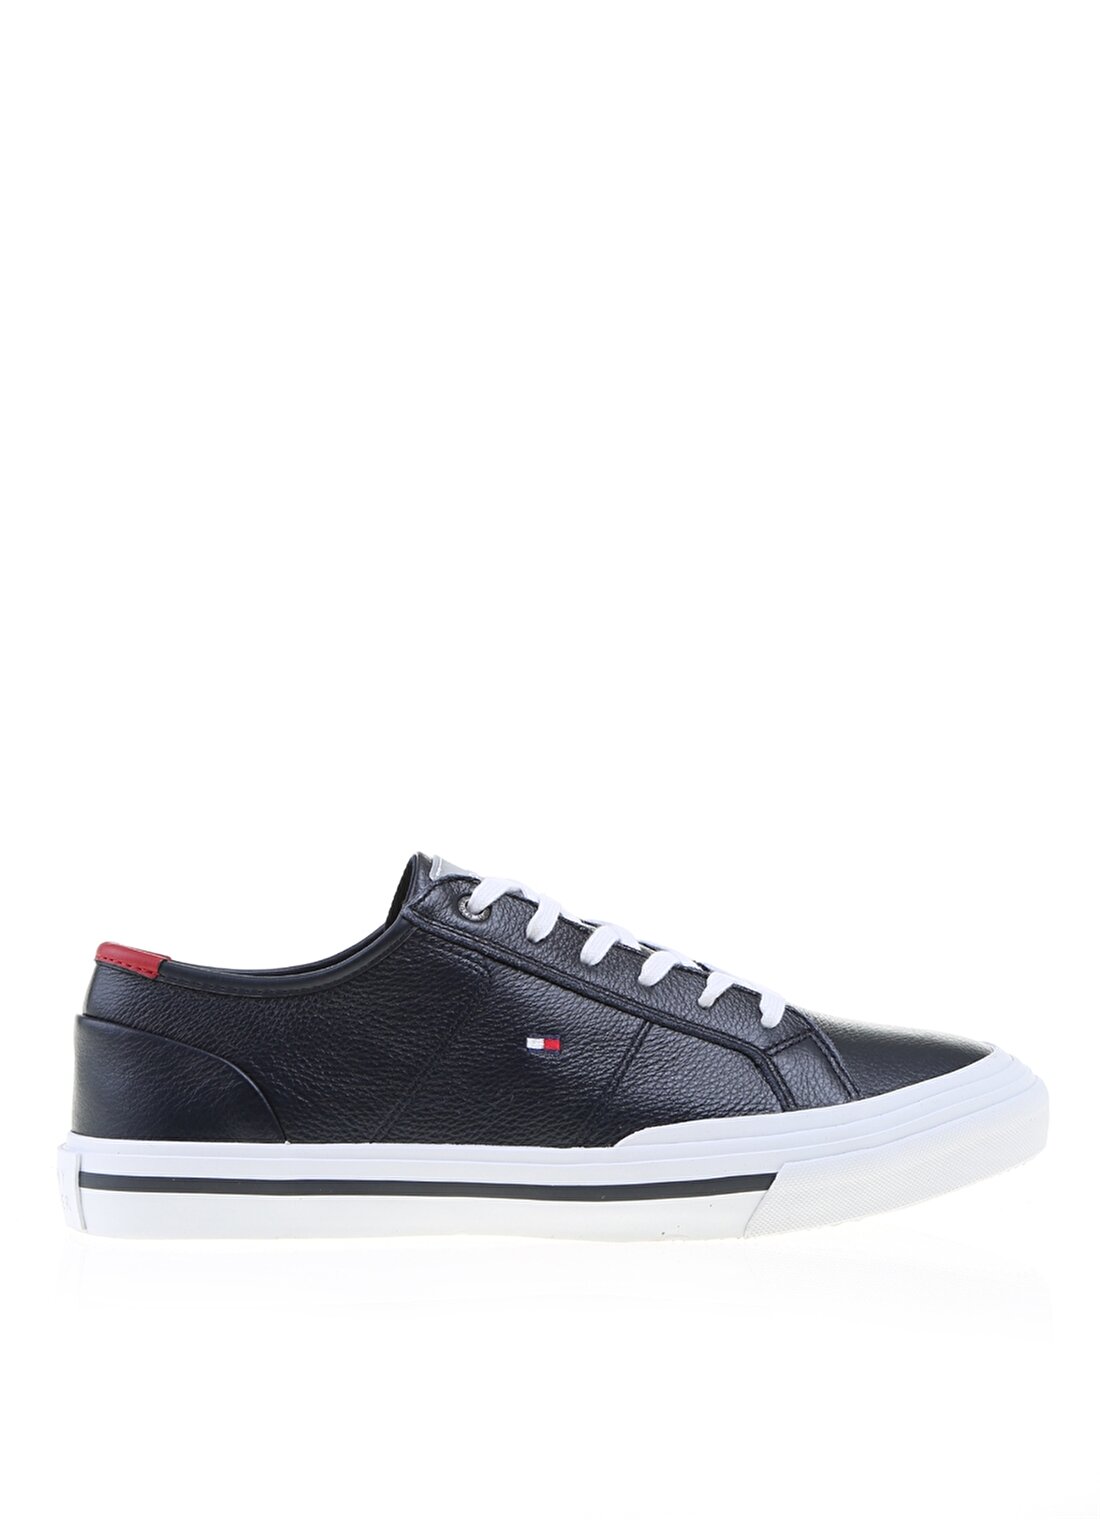 Tommy Hilfiger Core Corporate Flag Sneaker